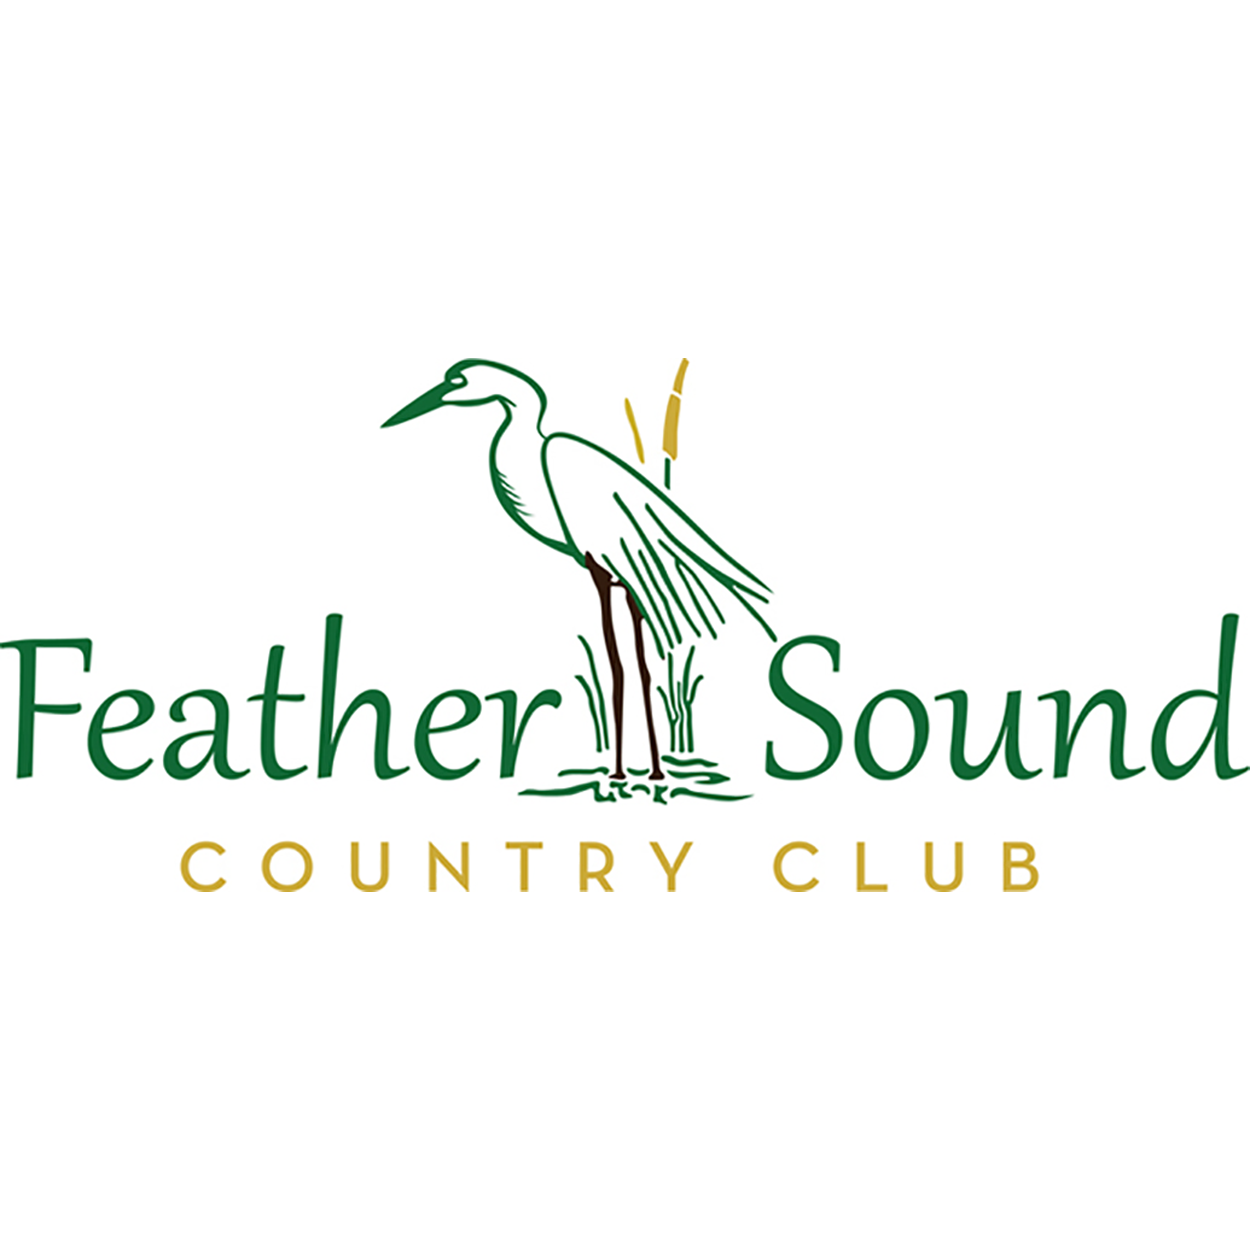 Feather Sound Country Club